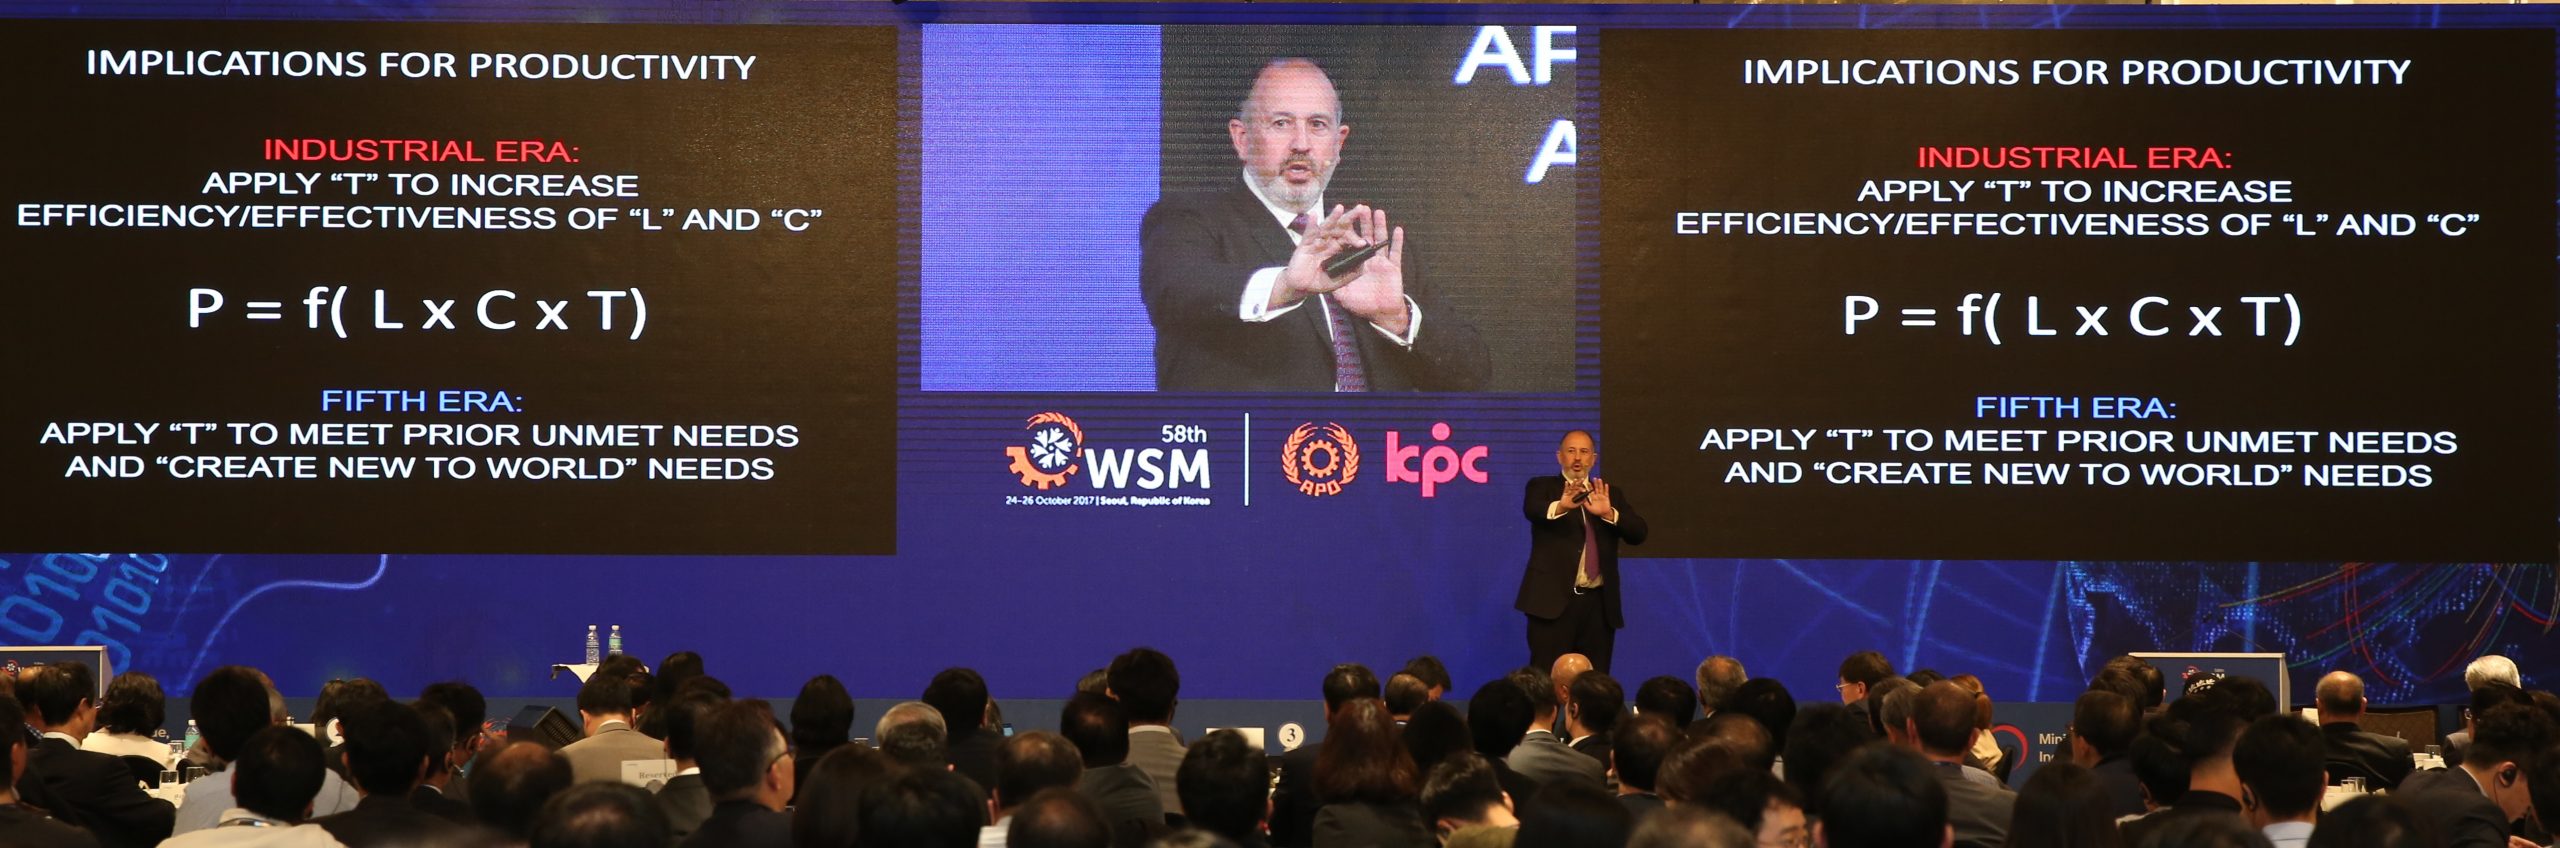 Fifth Era Co-founder Matthew le Merle speaking to the audience of the Global Conference on The 4th Industrial Revolution and the Future of Productivity held in Seoul, Korea, on 26 October 2017. 